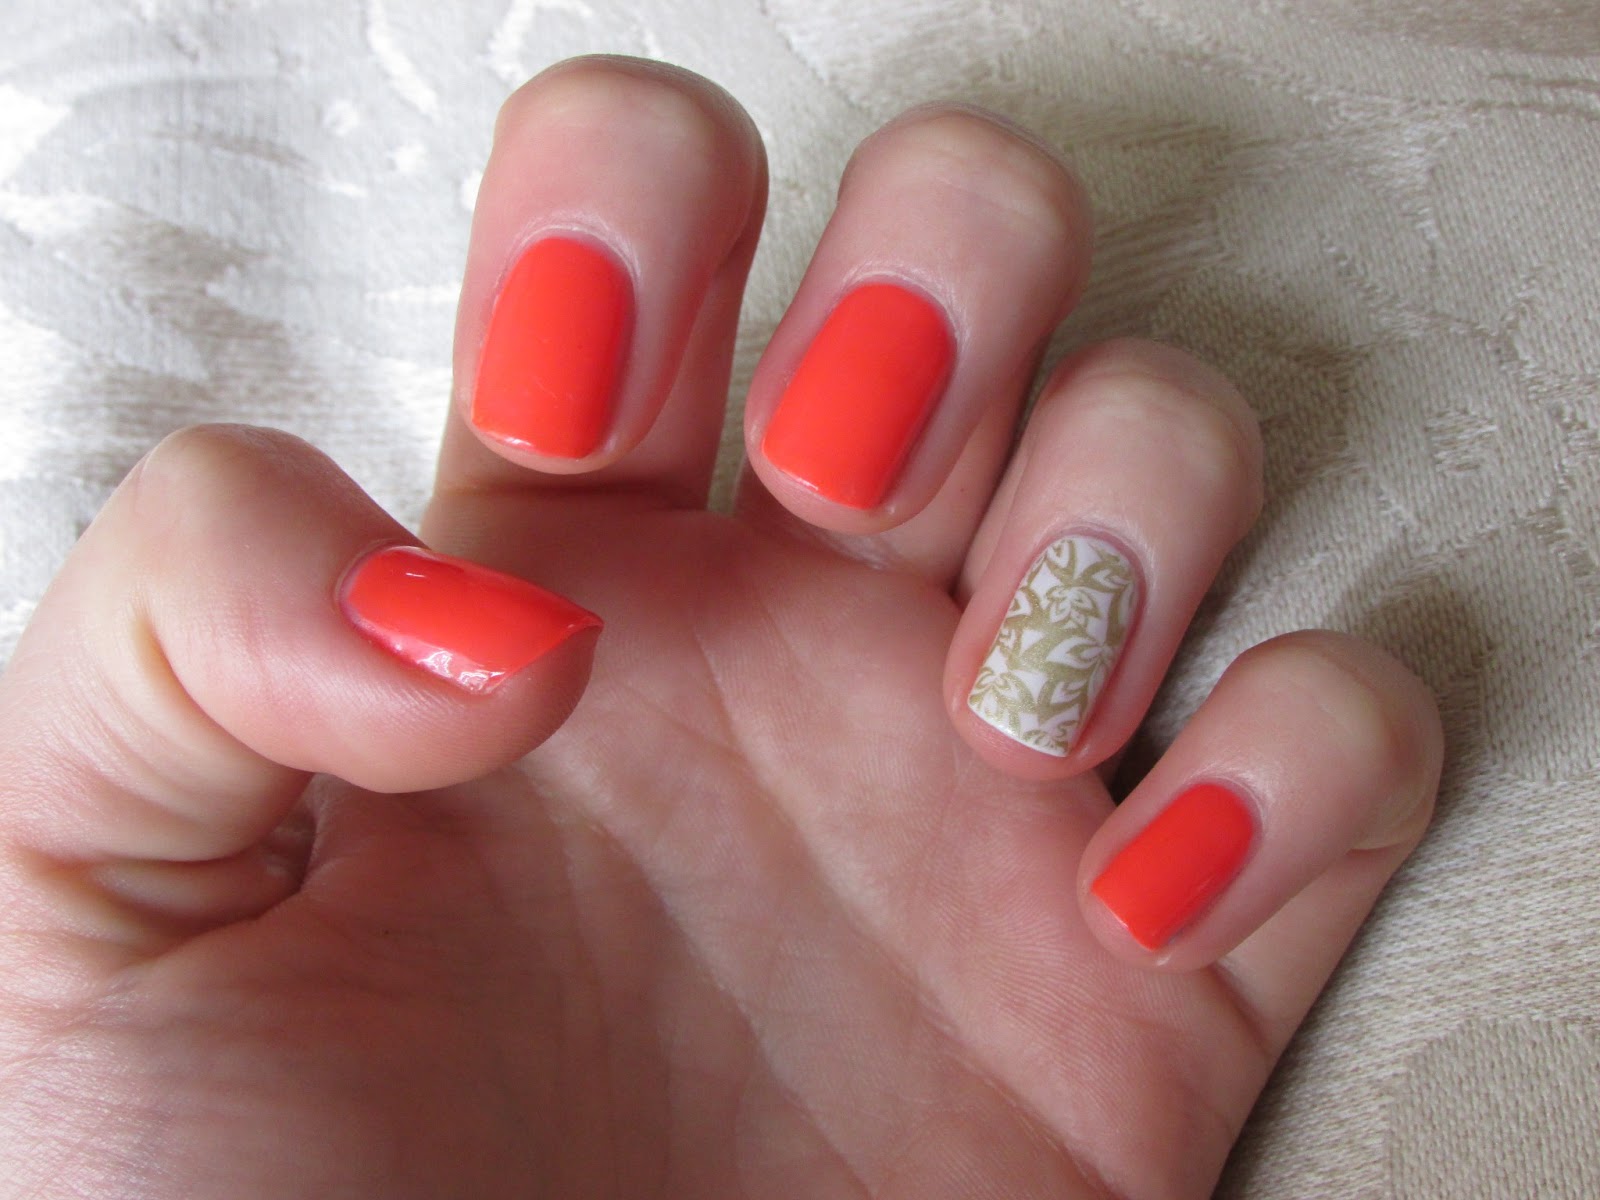 Gelish Nail Review by Rachel | The Sunday Girl